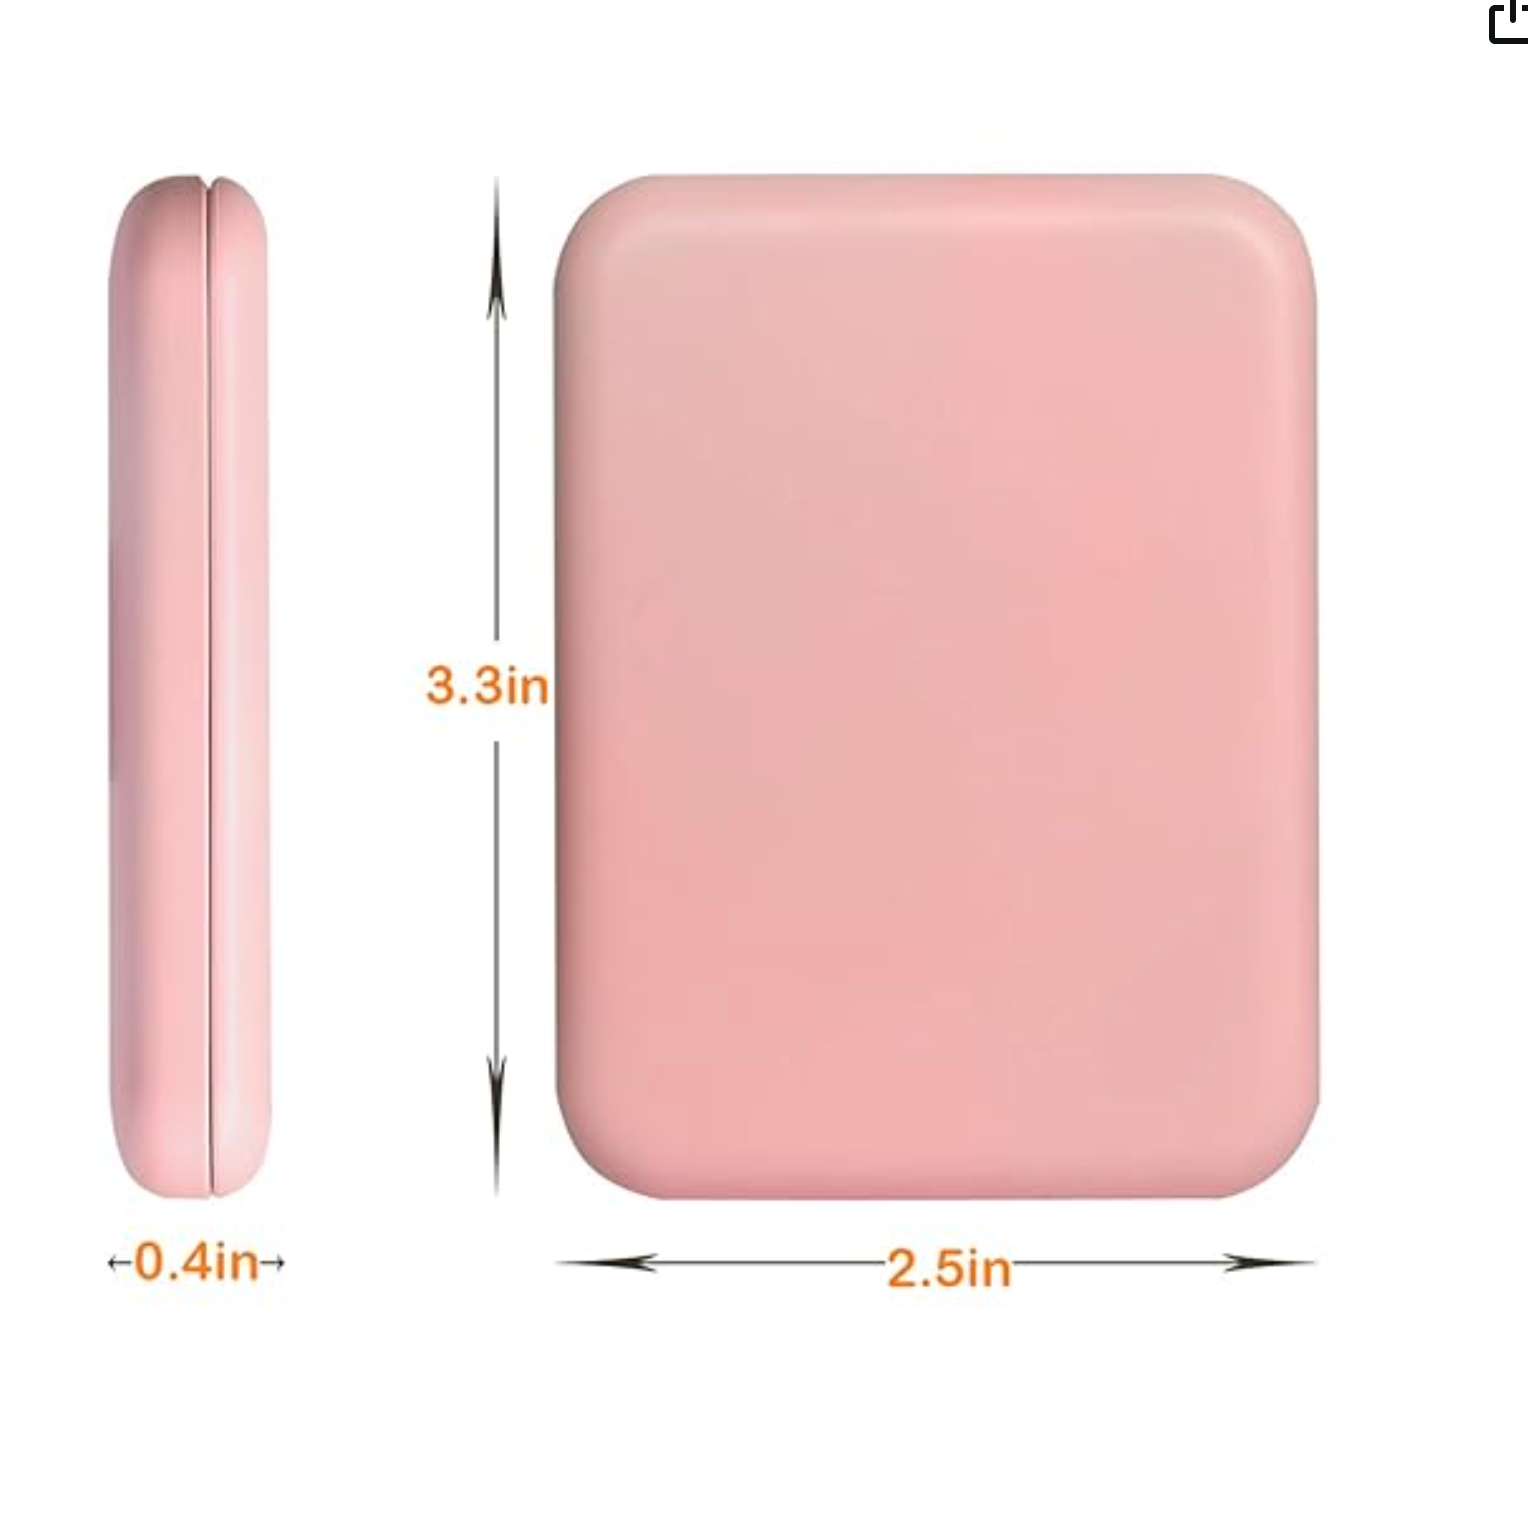 Pocket Mirror, 1X/3X Magnification LED Compact Travel Makeup Mirror with Light for Purse, 2-Sided, Portable, Folding, Handheld, Small Lighted Mirror for Gift, Pink -  Trendy Vendy LA